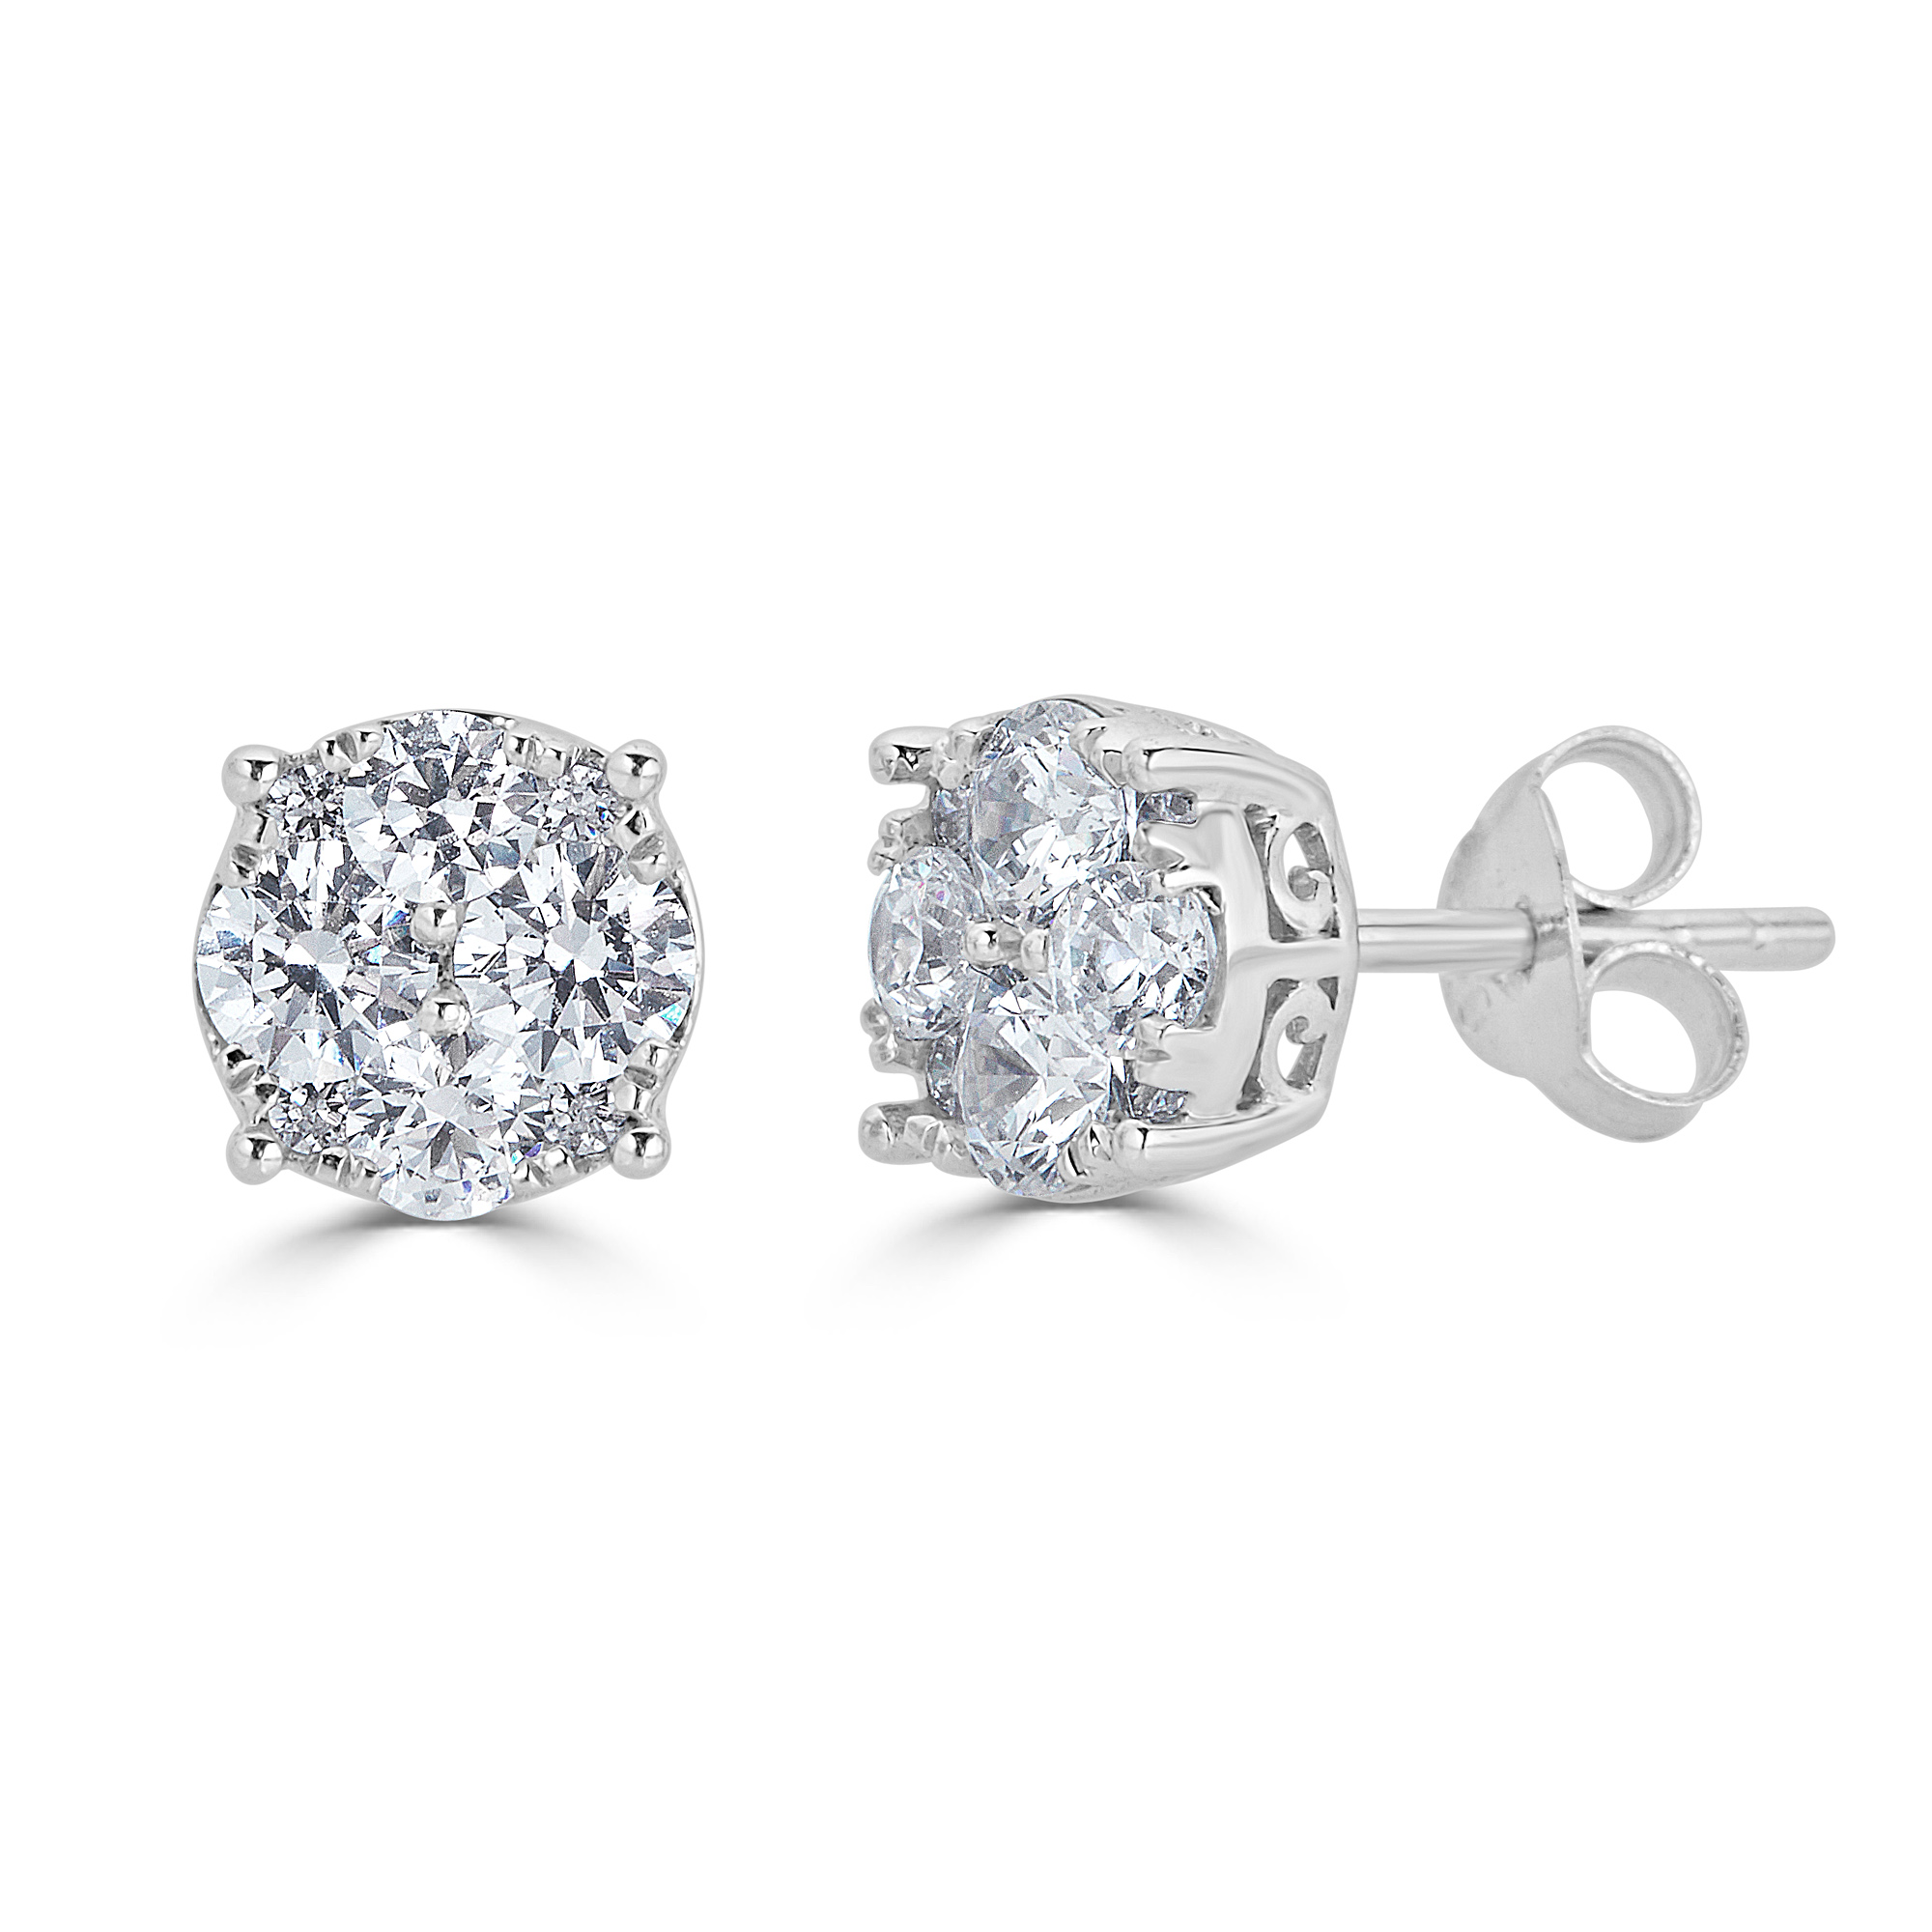 Details about  / 14K Gold Imitation White Diamond Earrings for Women Natural Silver 925 Jewelry